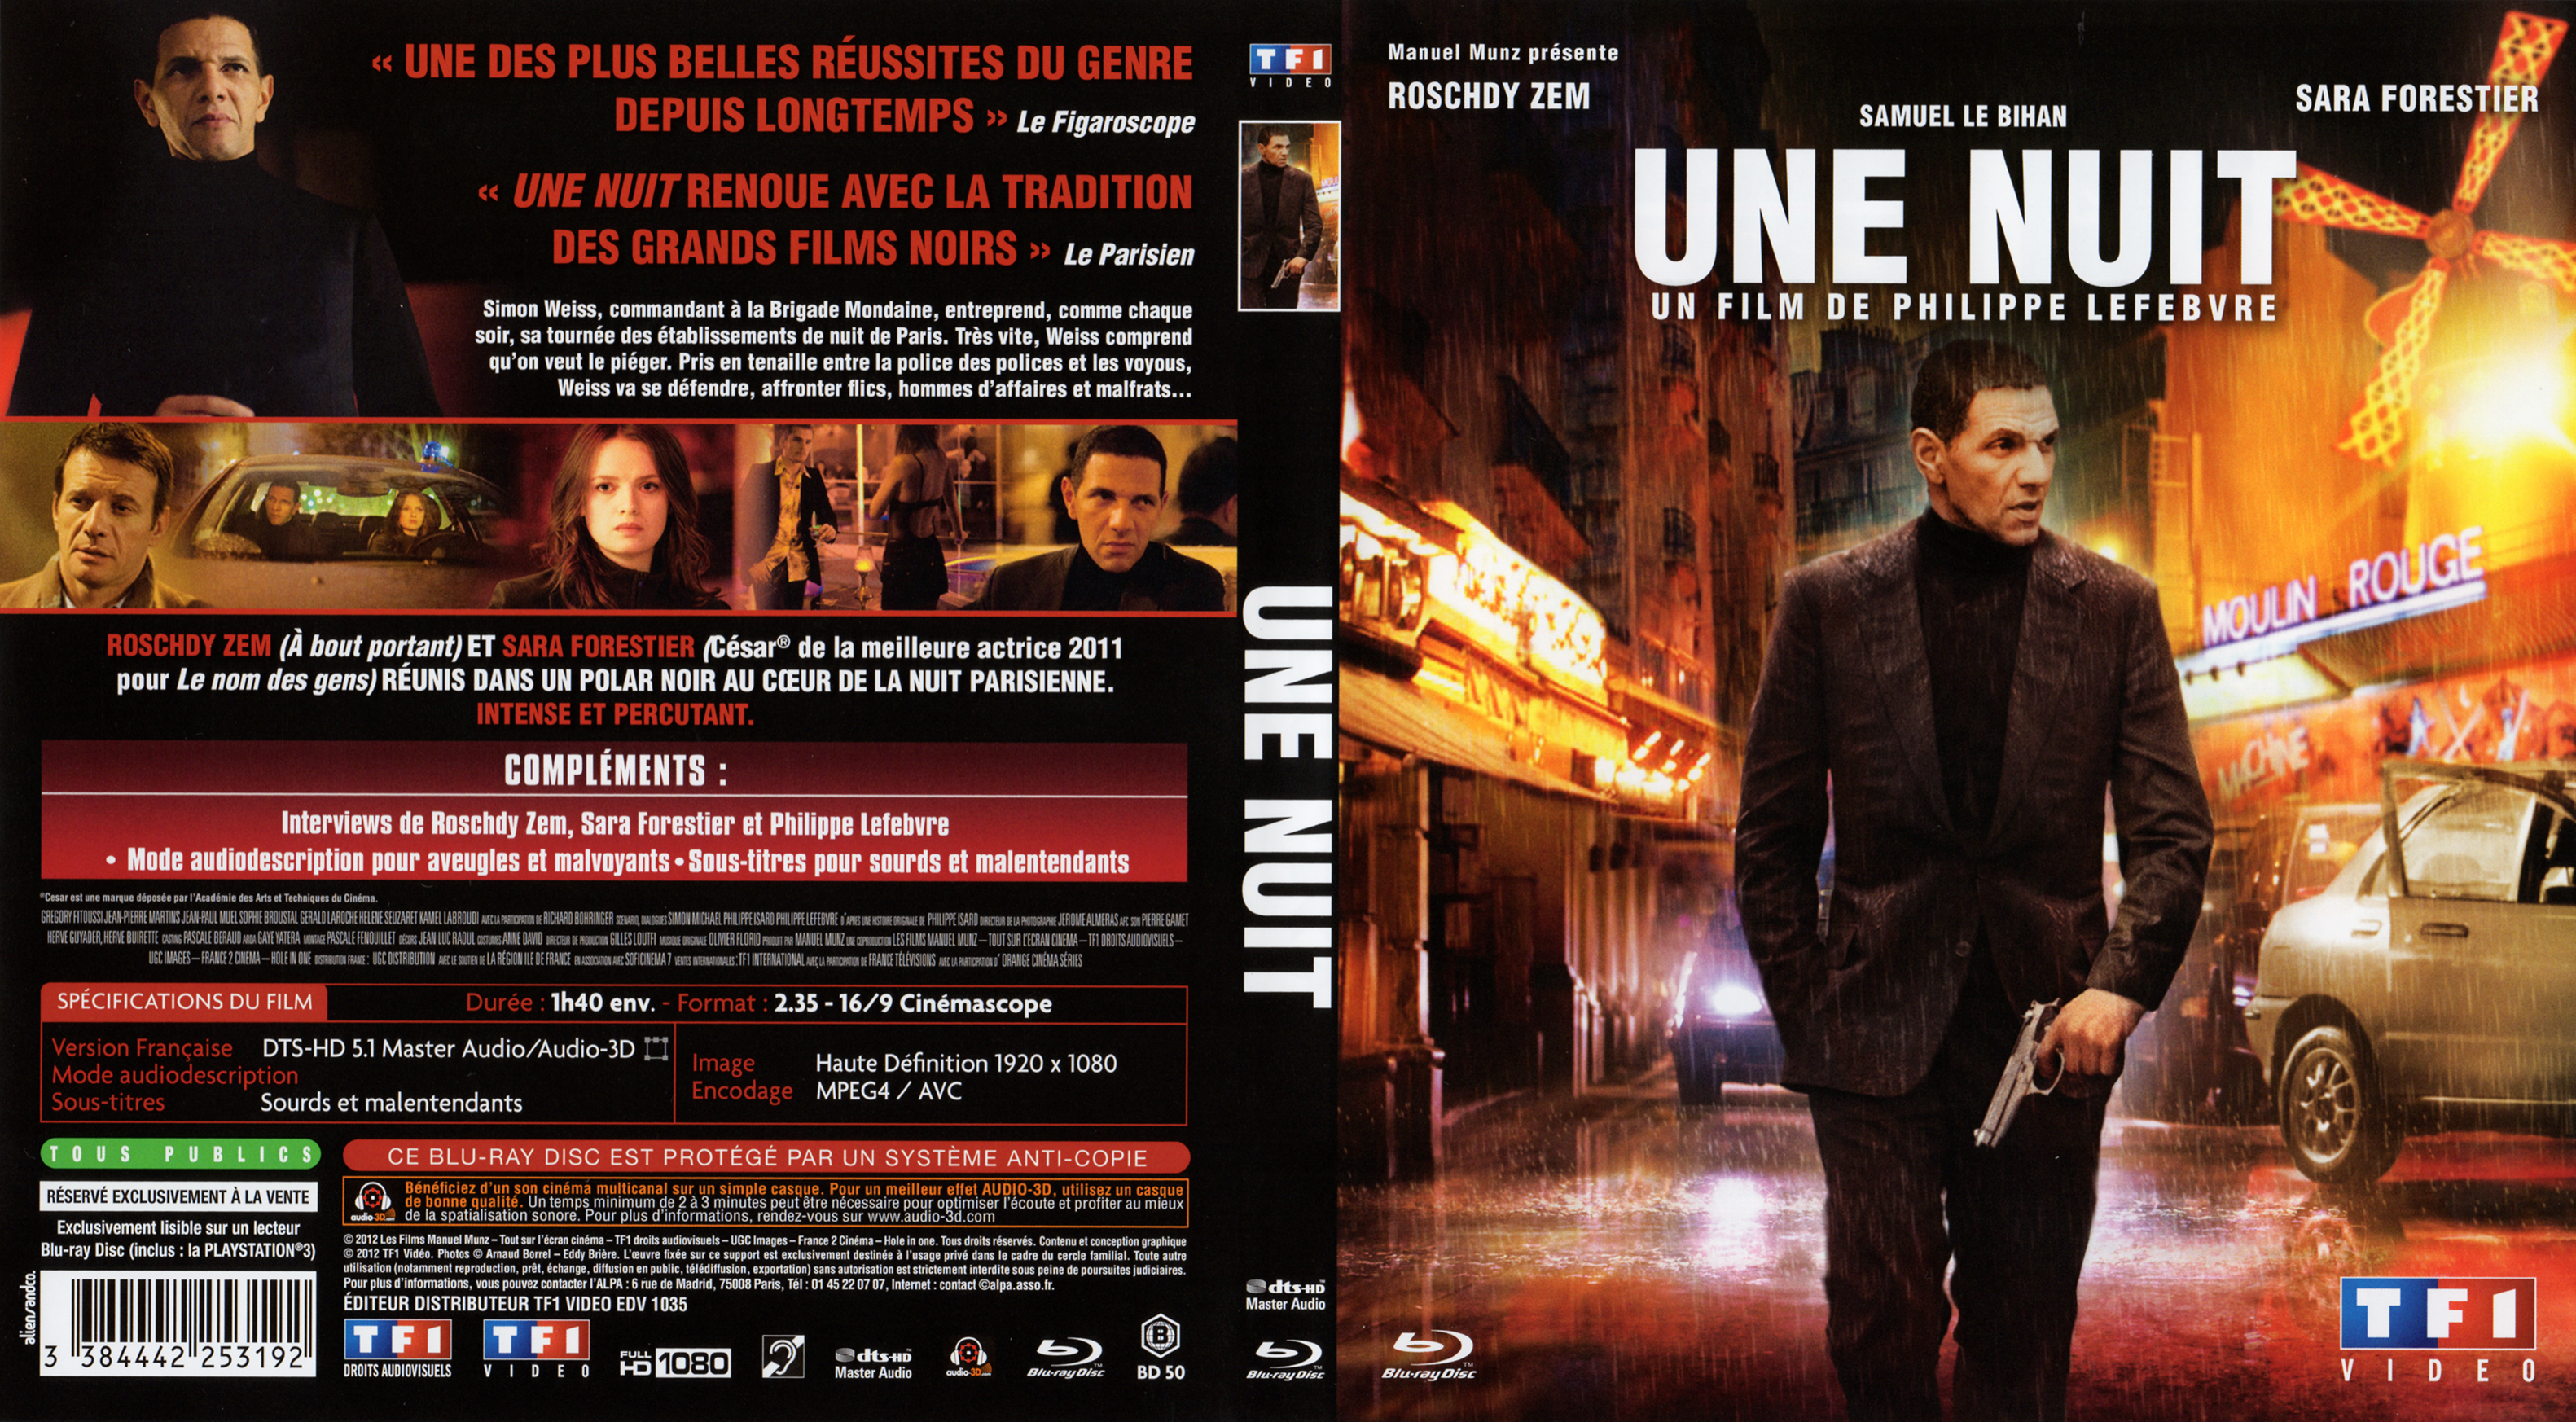 Jaquette DVD Une nuit (BLU-RAY)